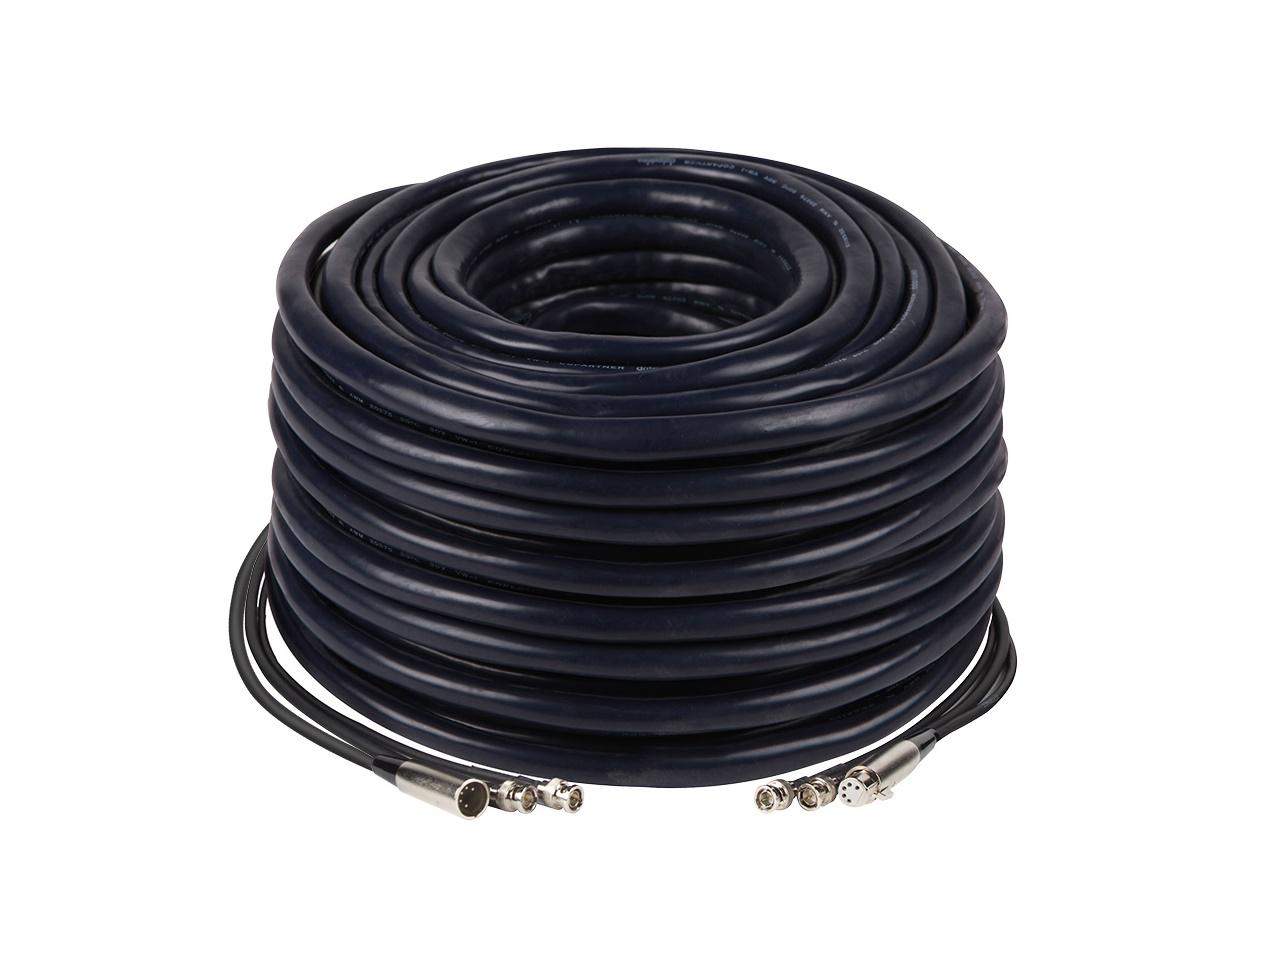 Datavideo CB-24 100m All in One Cable for Use with SD-SDI and CVBS MVS Systems